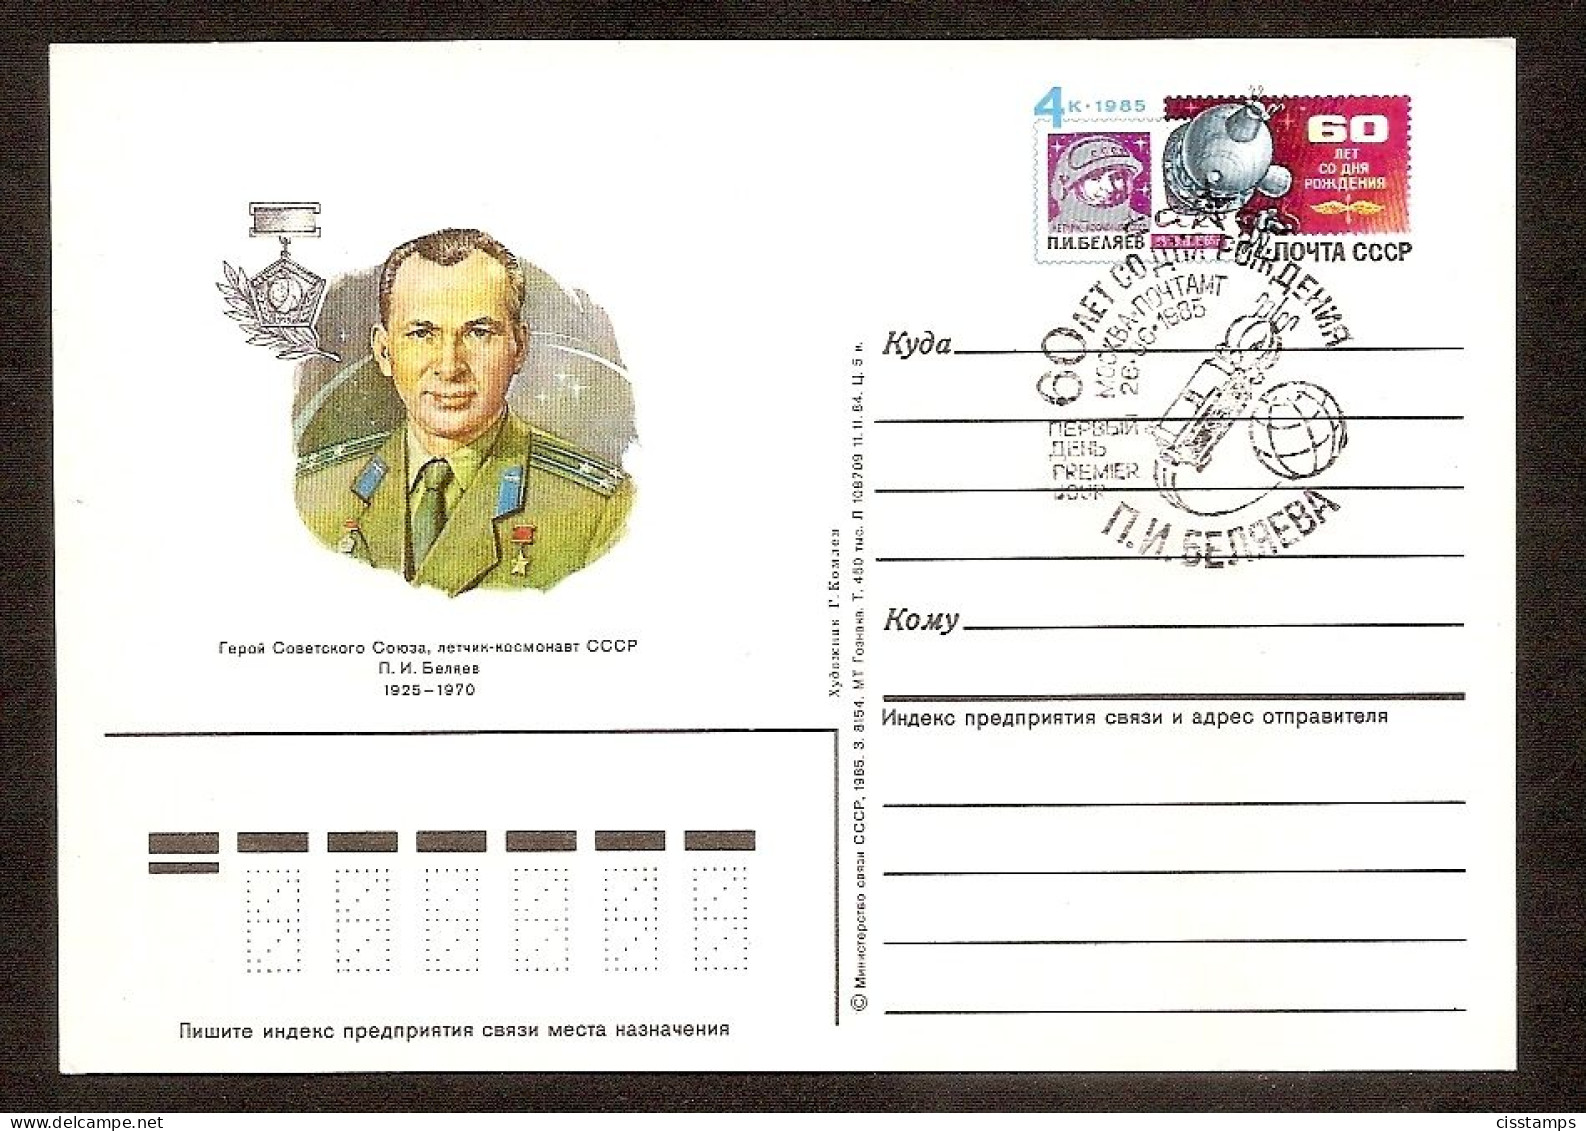 Russia USSR 1985●60th Anniv. Of P.Belyajev●Cosmonaut&Space Ship Voschod-2 ●●stamped Stationery●postal Card●FDC Mi PSo149 - 1980-91